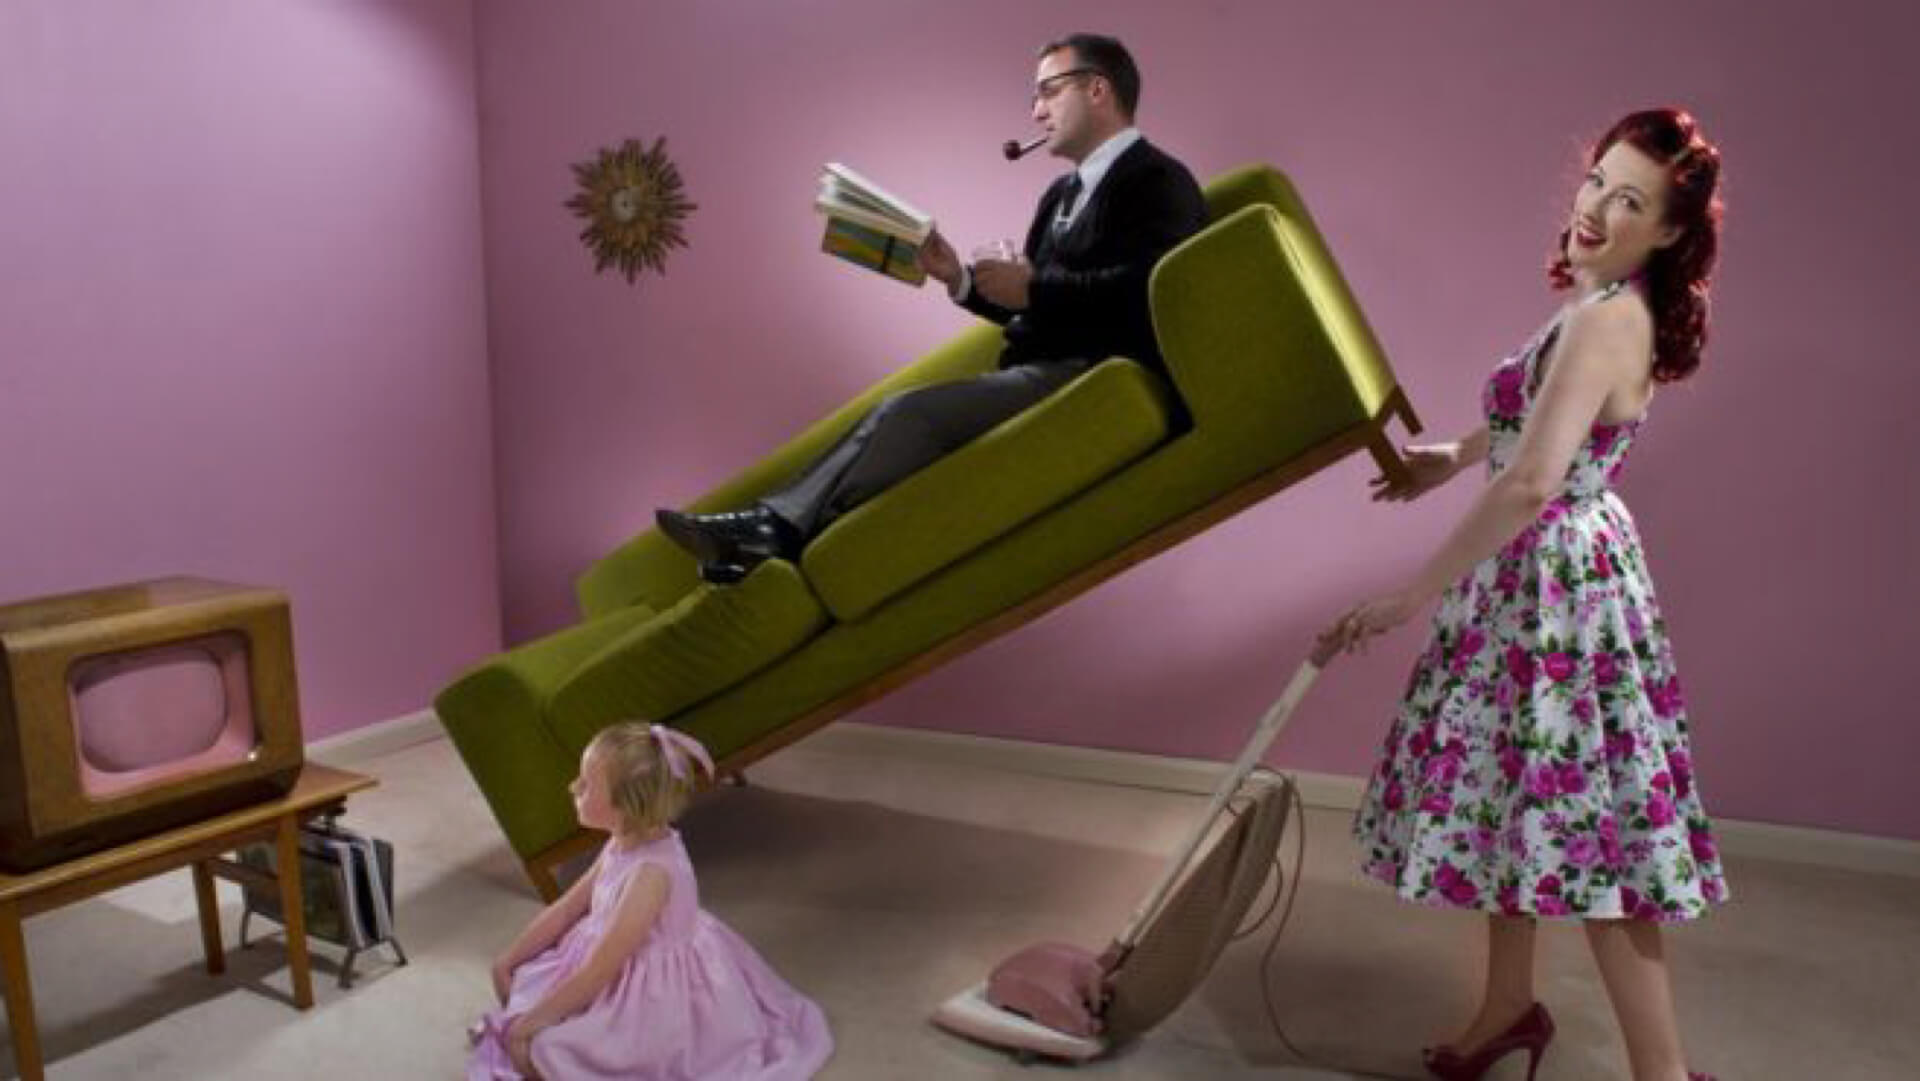 'Harmful' gender stereotypes in adverts banned